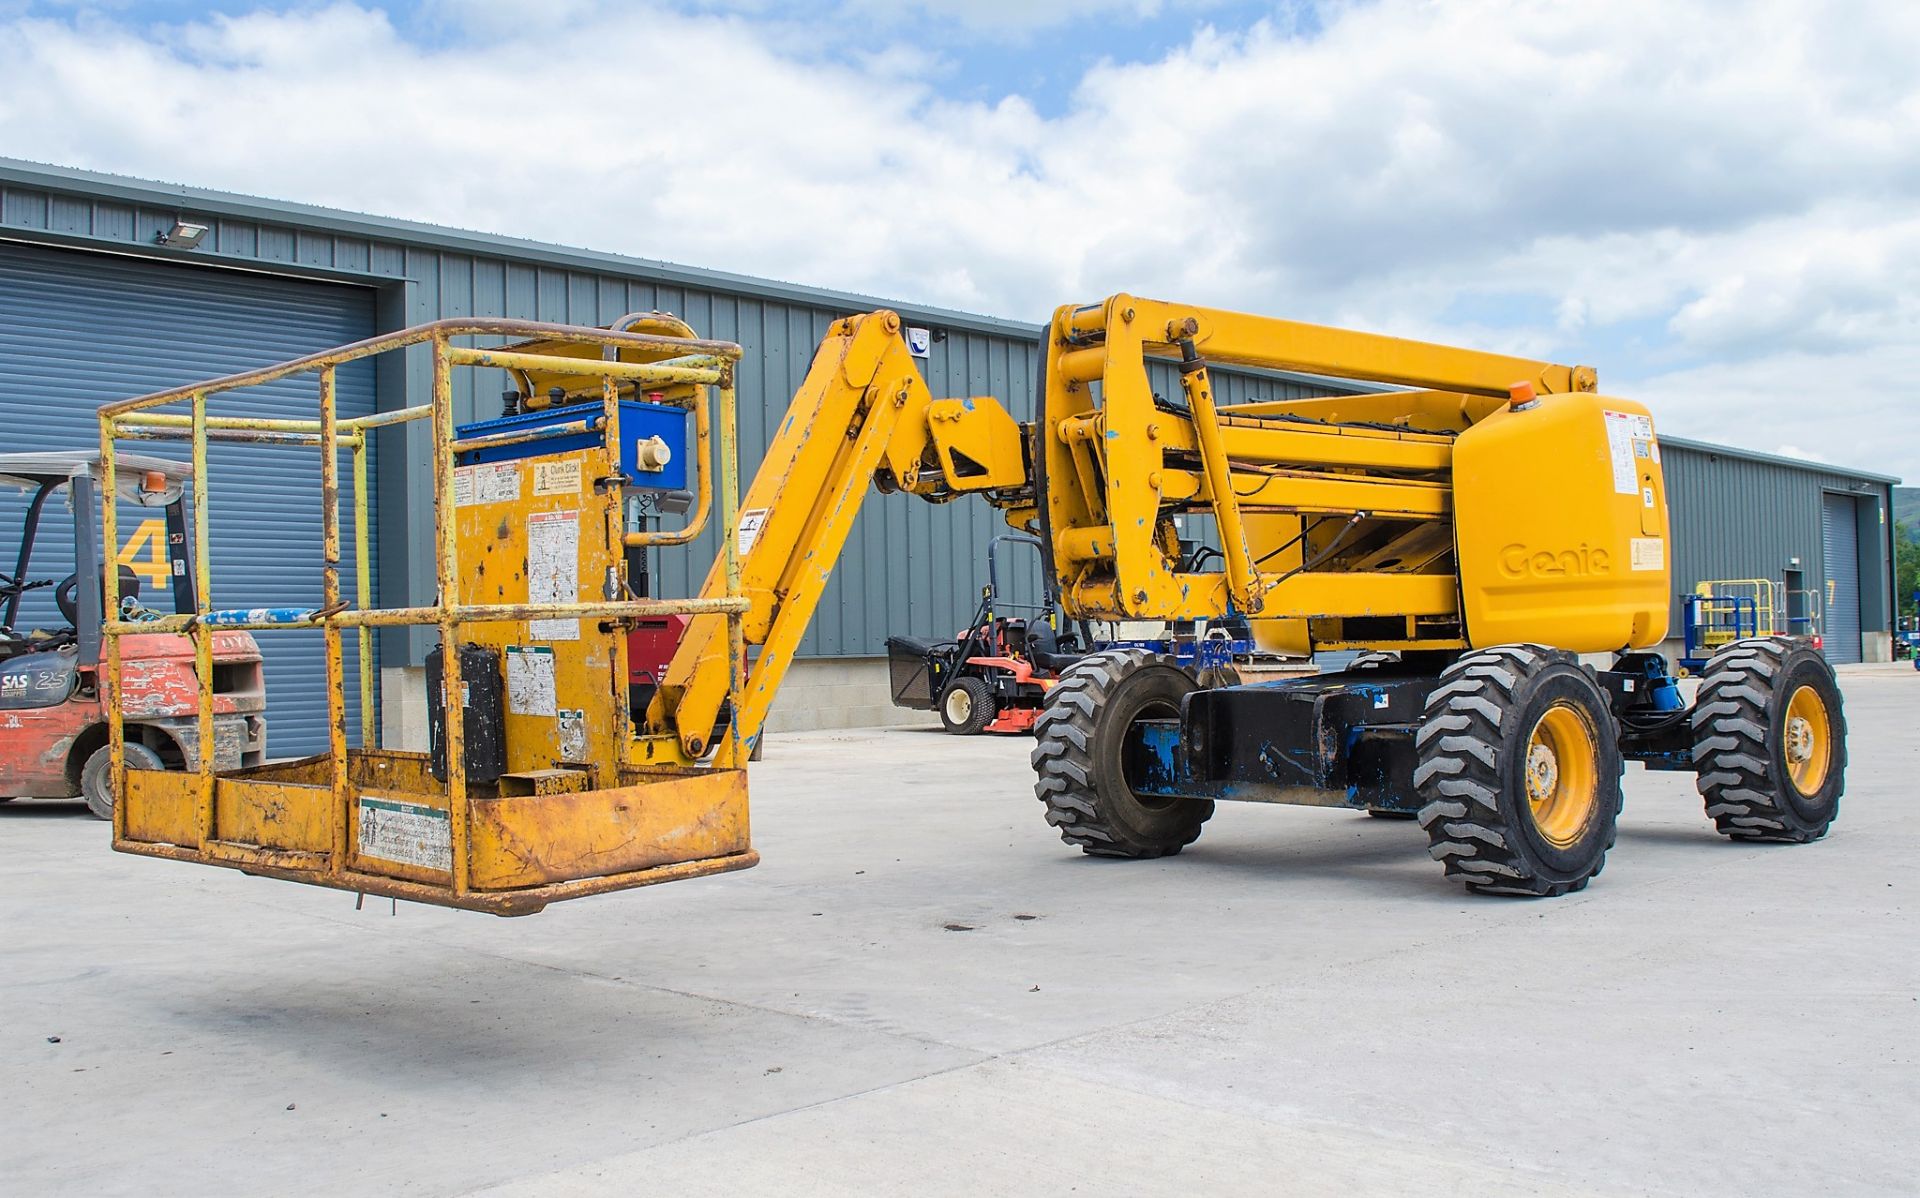 Genie Z45/25 diesel driven 45 ft boom lift access platform Year: 2001 S/N: 18365 Recorded Hours: